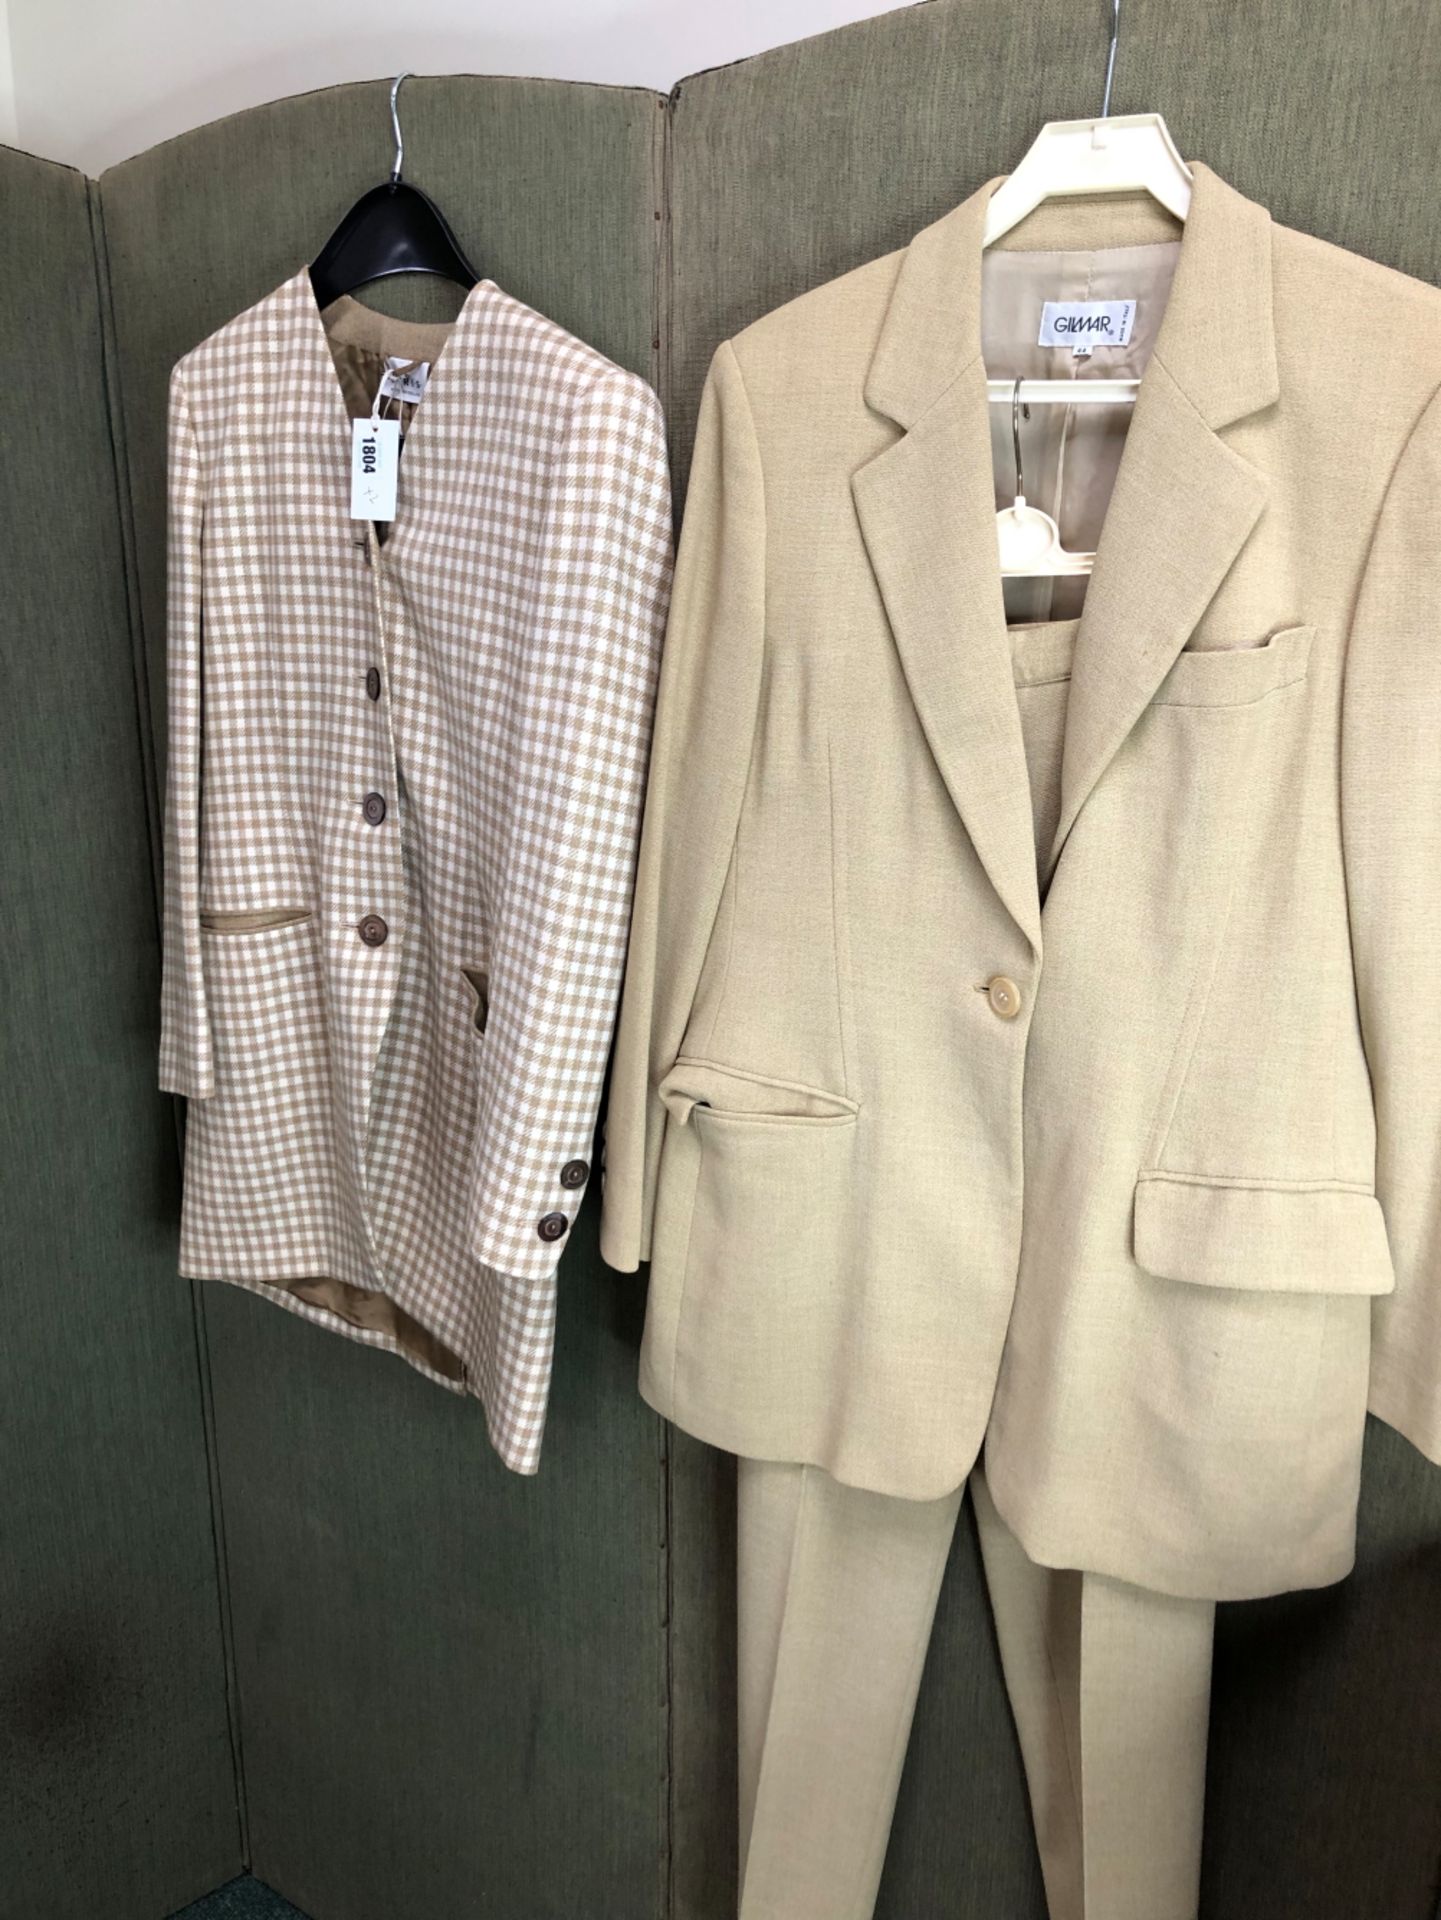 A AKRIS SWITZERLAND LADIES CREAM AND BEIGE CHECKED JACKET US SIZE 8 TOGETHER WITH A GILMAR ITALY